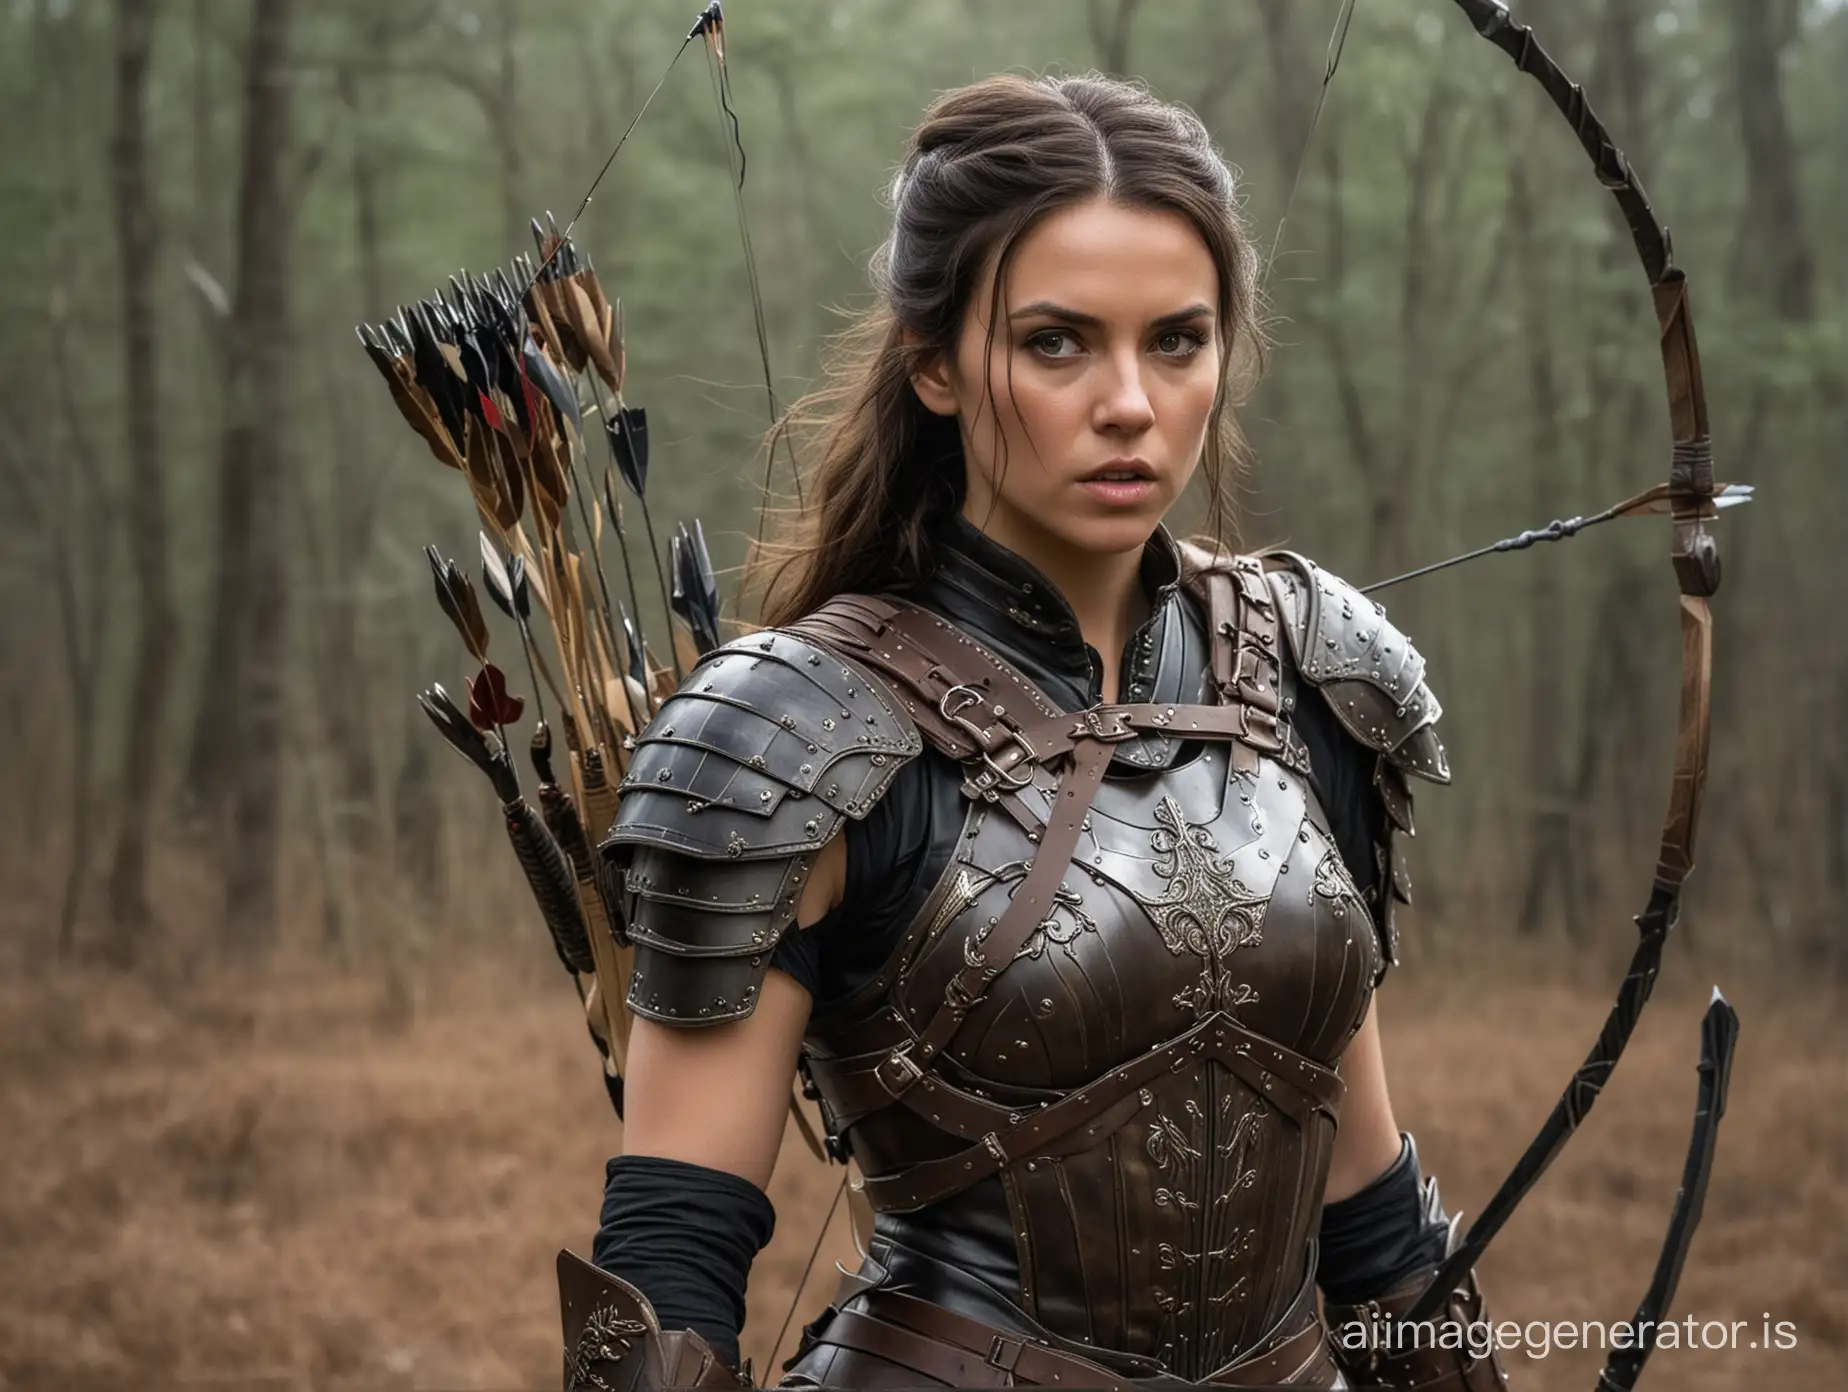 A brunette woman wearing armor with a bow and arrows and a knife